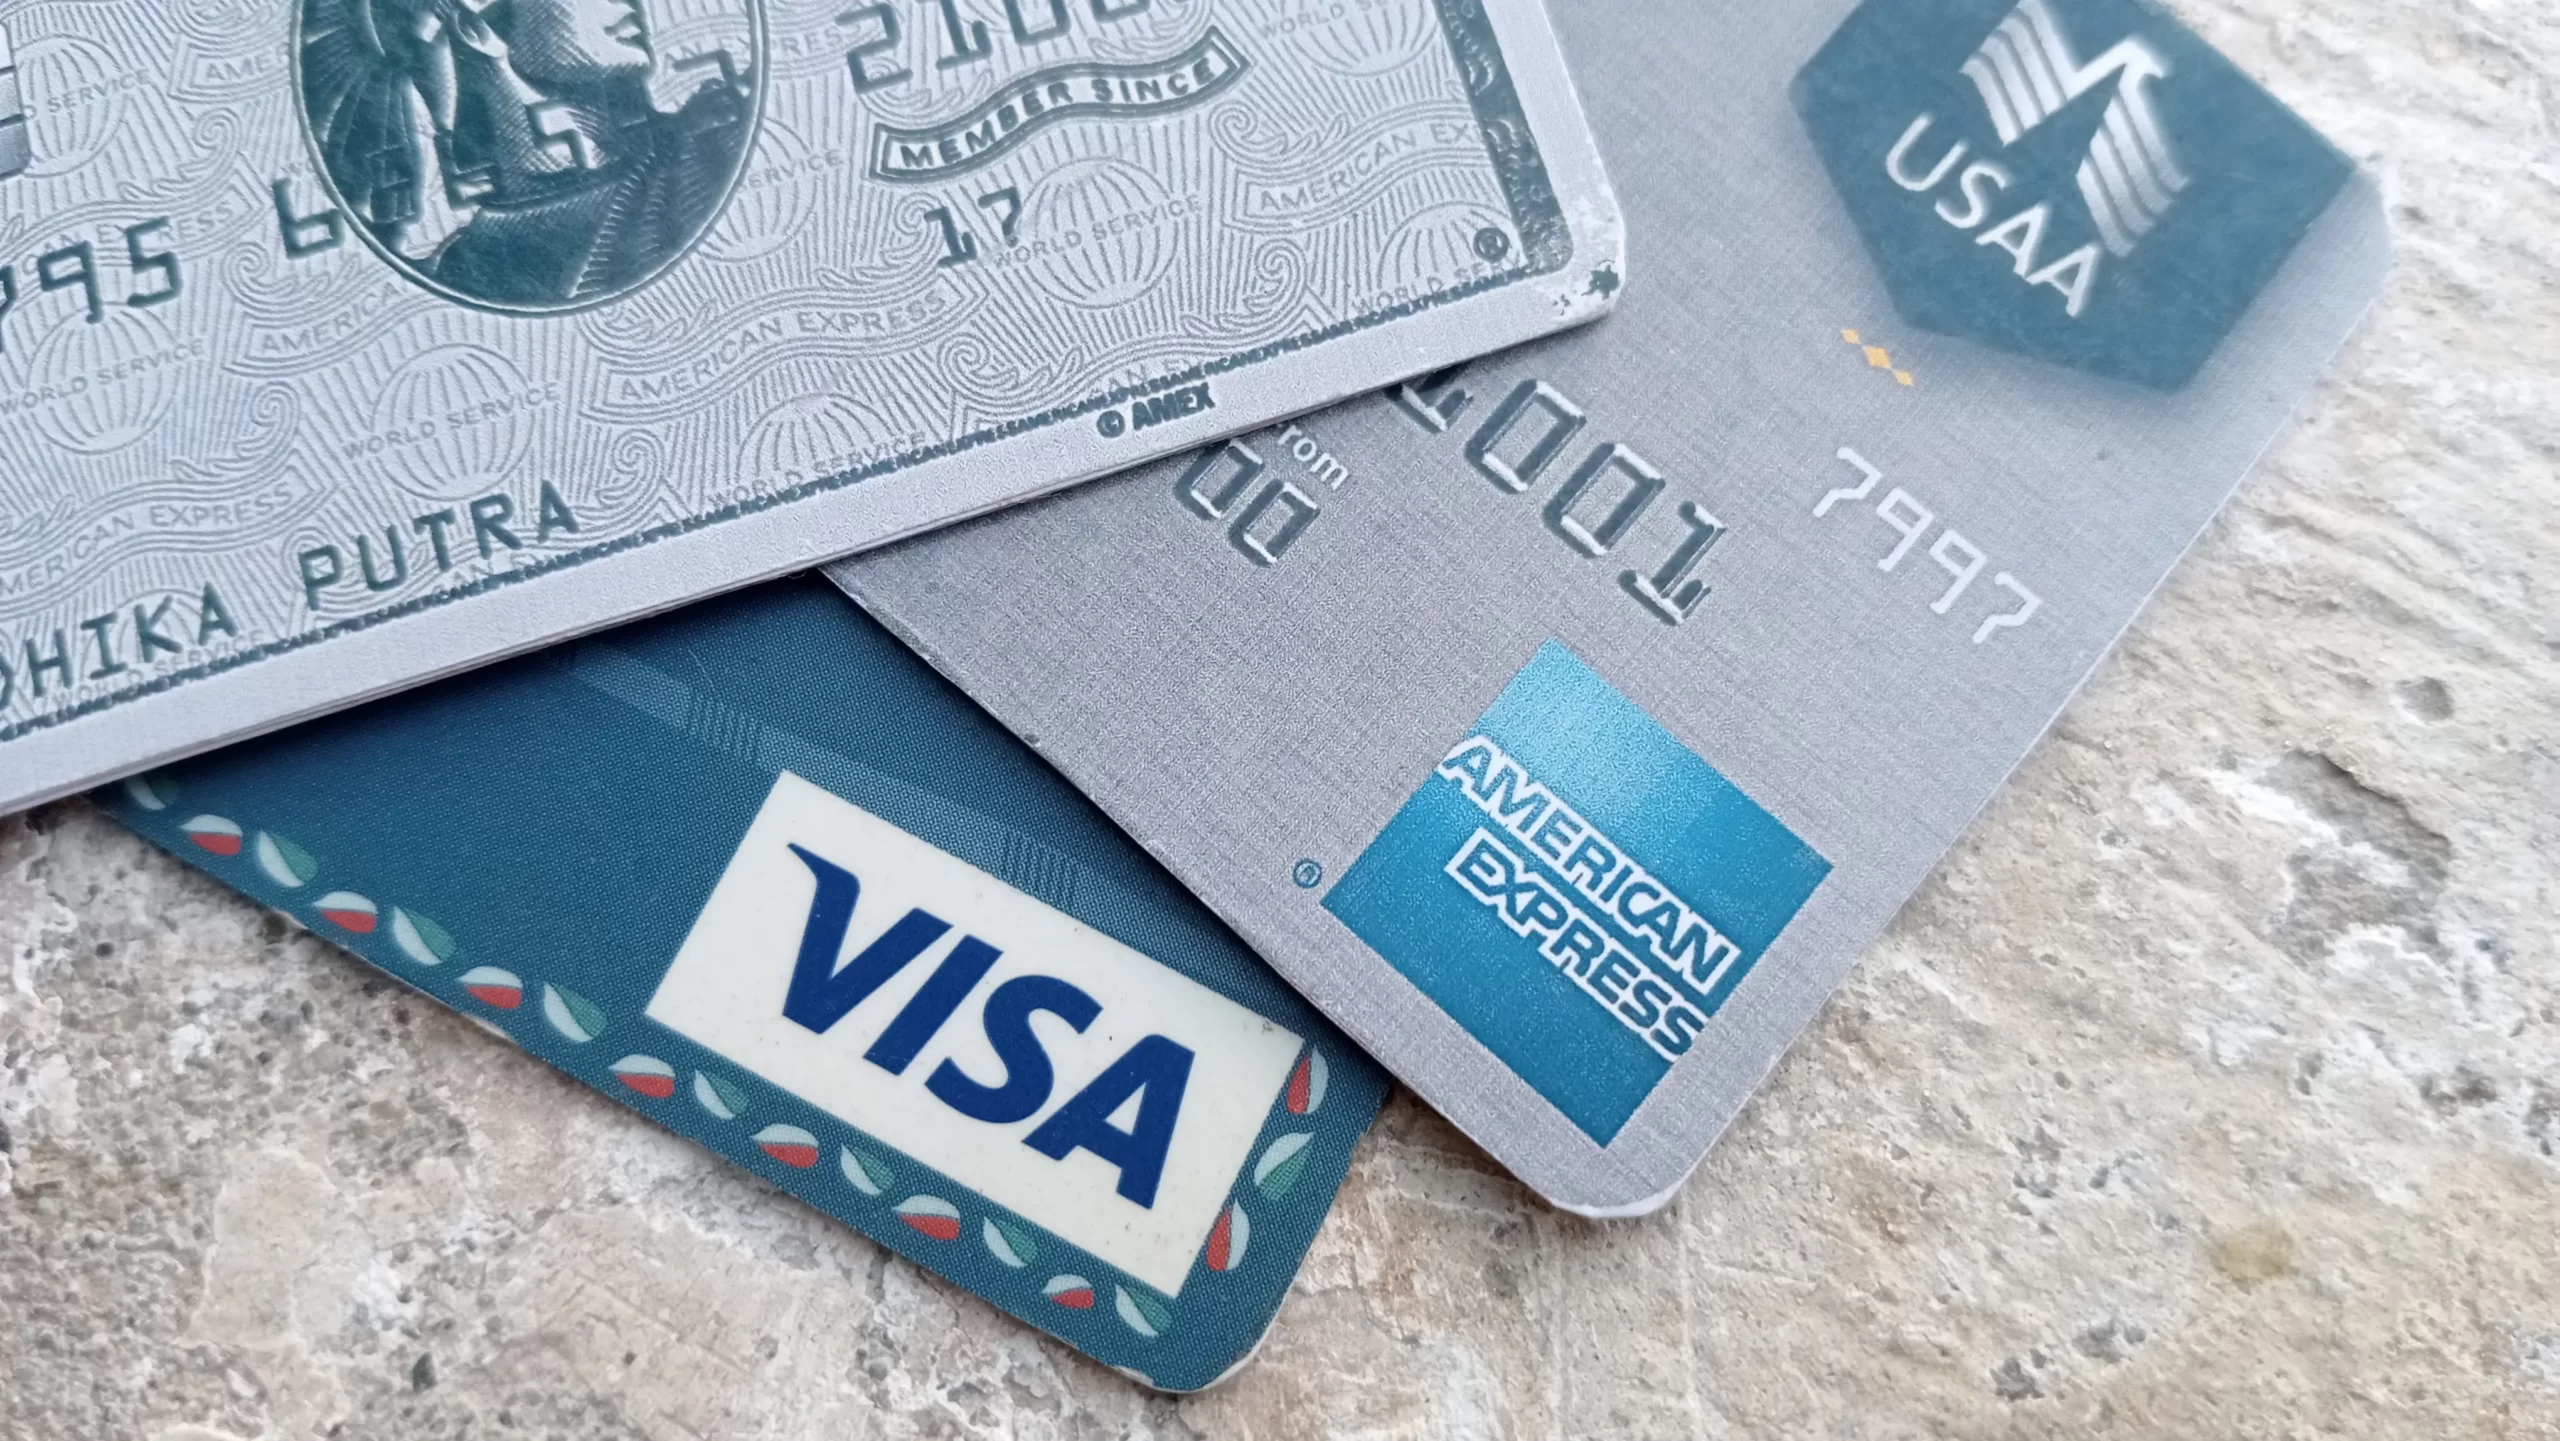 can you use a visa gift card on doordash